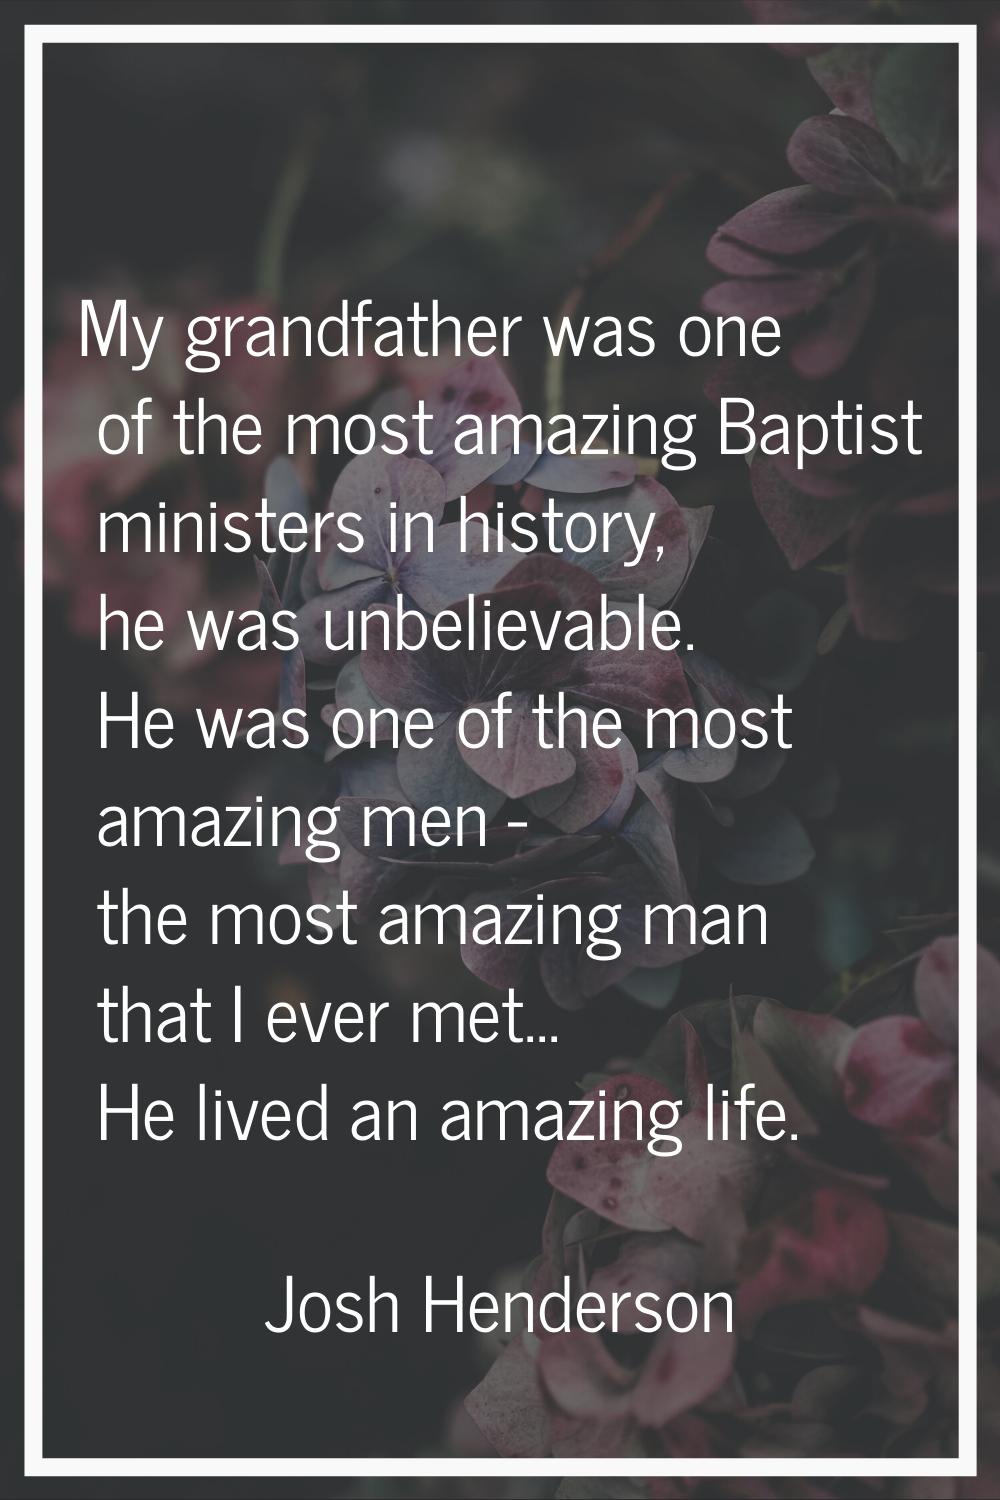 My grandfather was one of the most amazing Baptist ministers in history, he was unbelievable. He wa